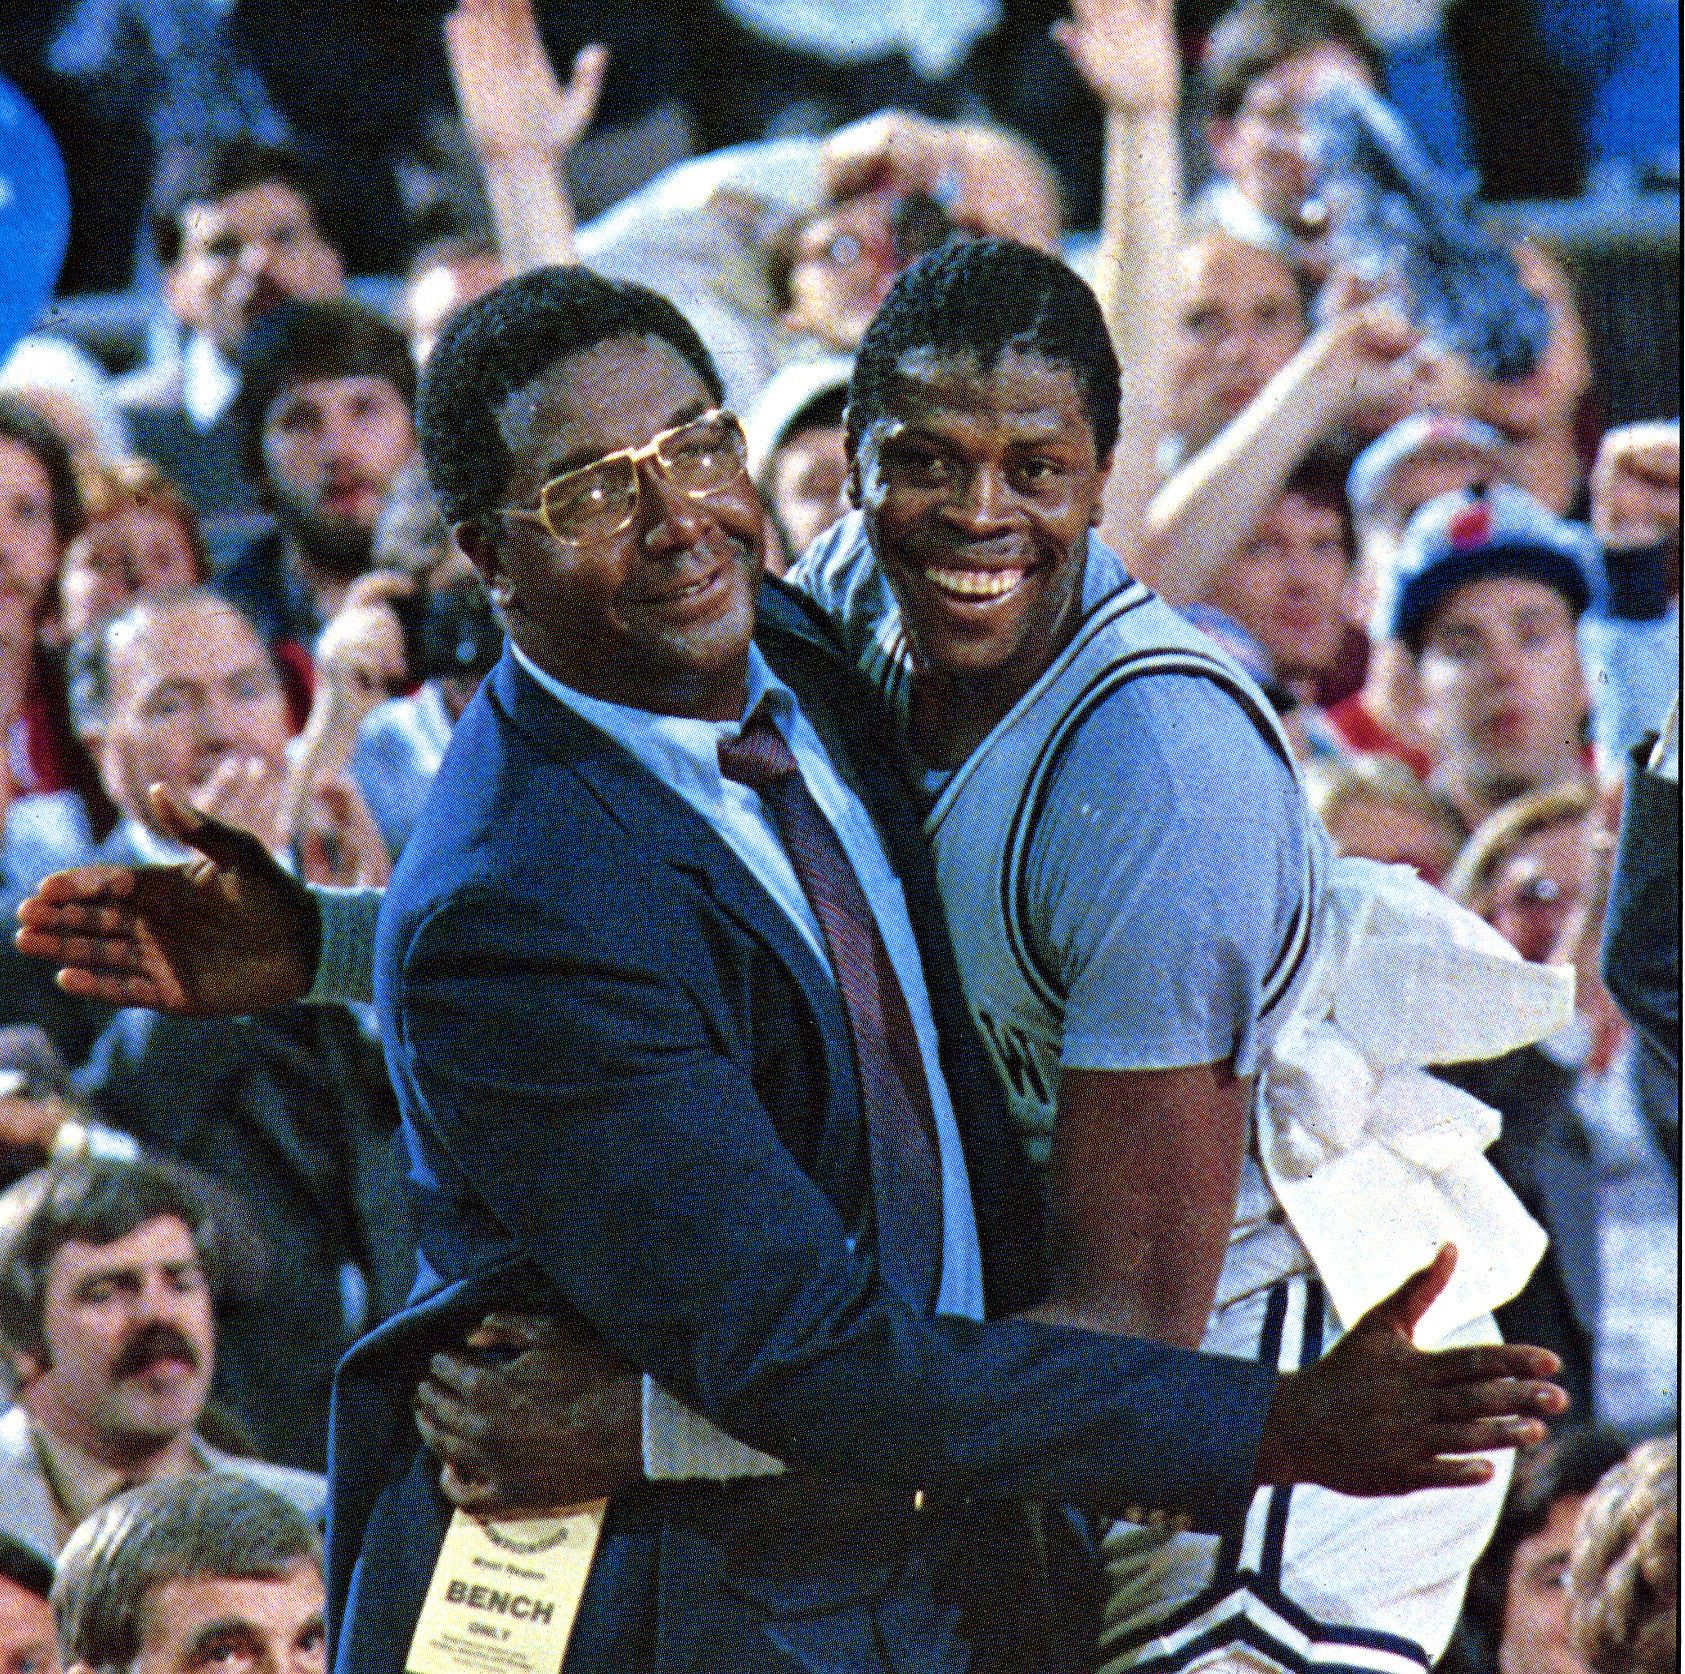 Patrick Ewing and late John Thompson pose for a photo during a game at McDonough Arena in Washington, D.C. | Photo: Getty Images.